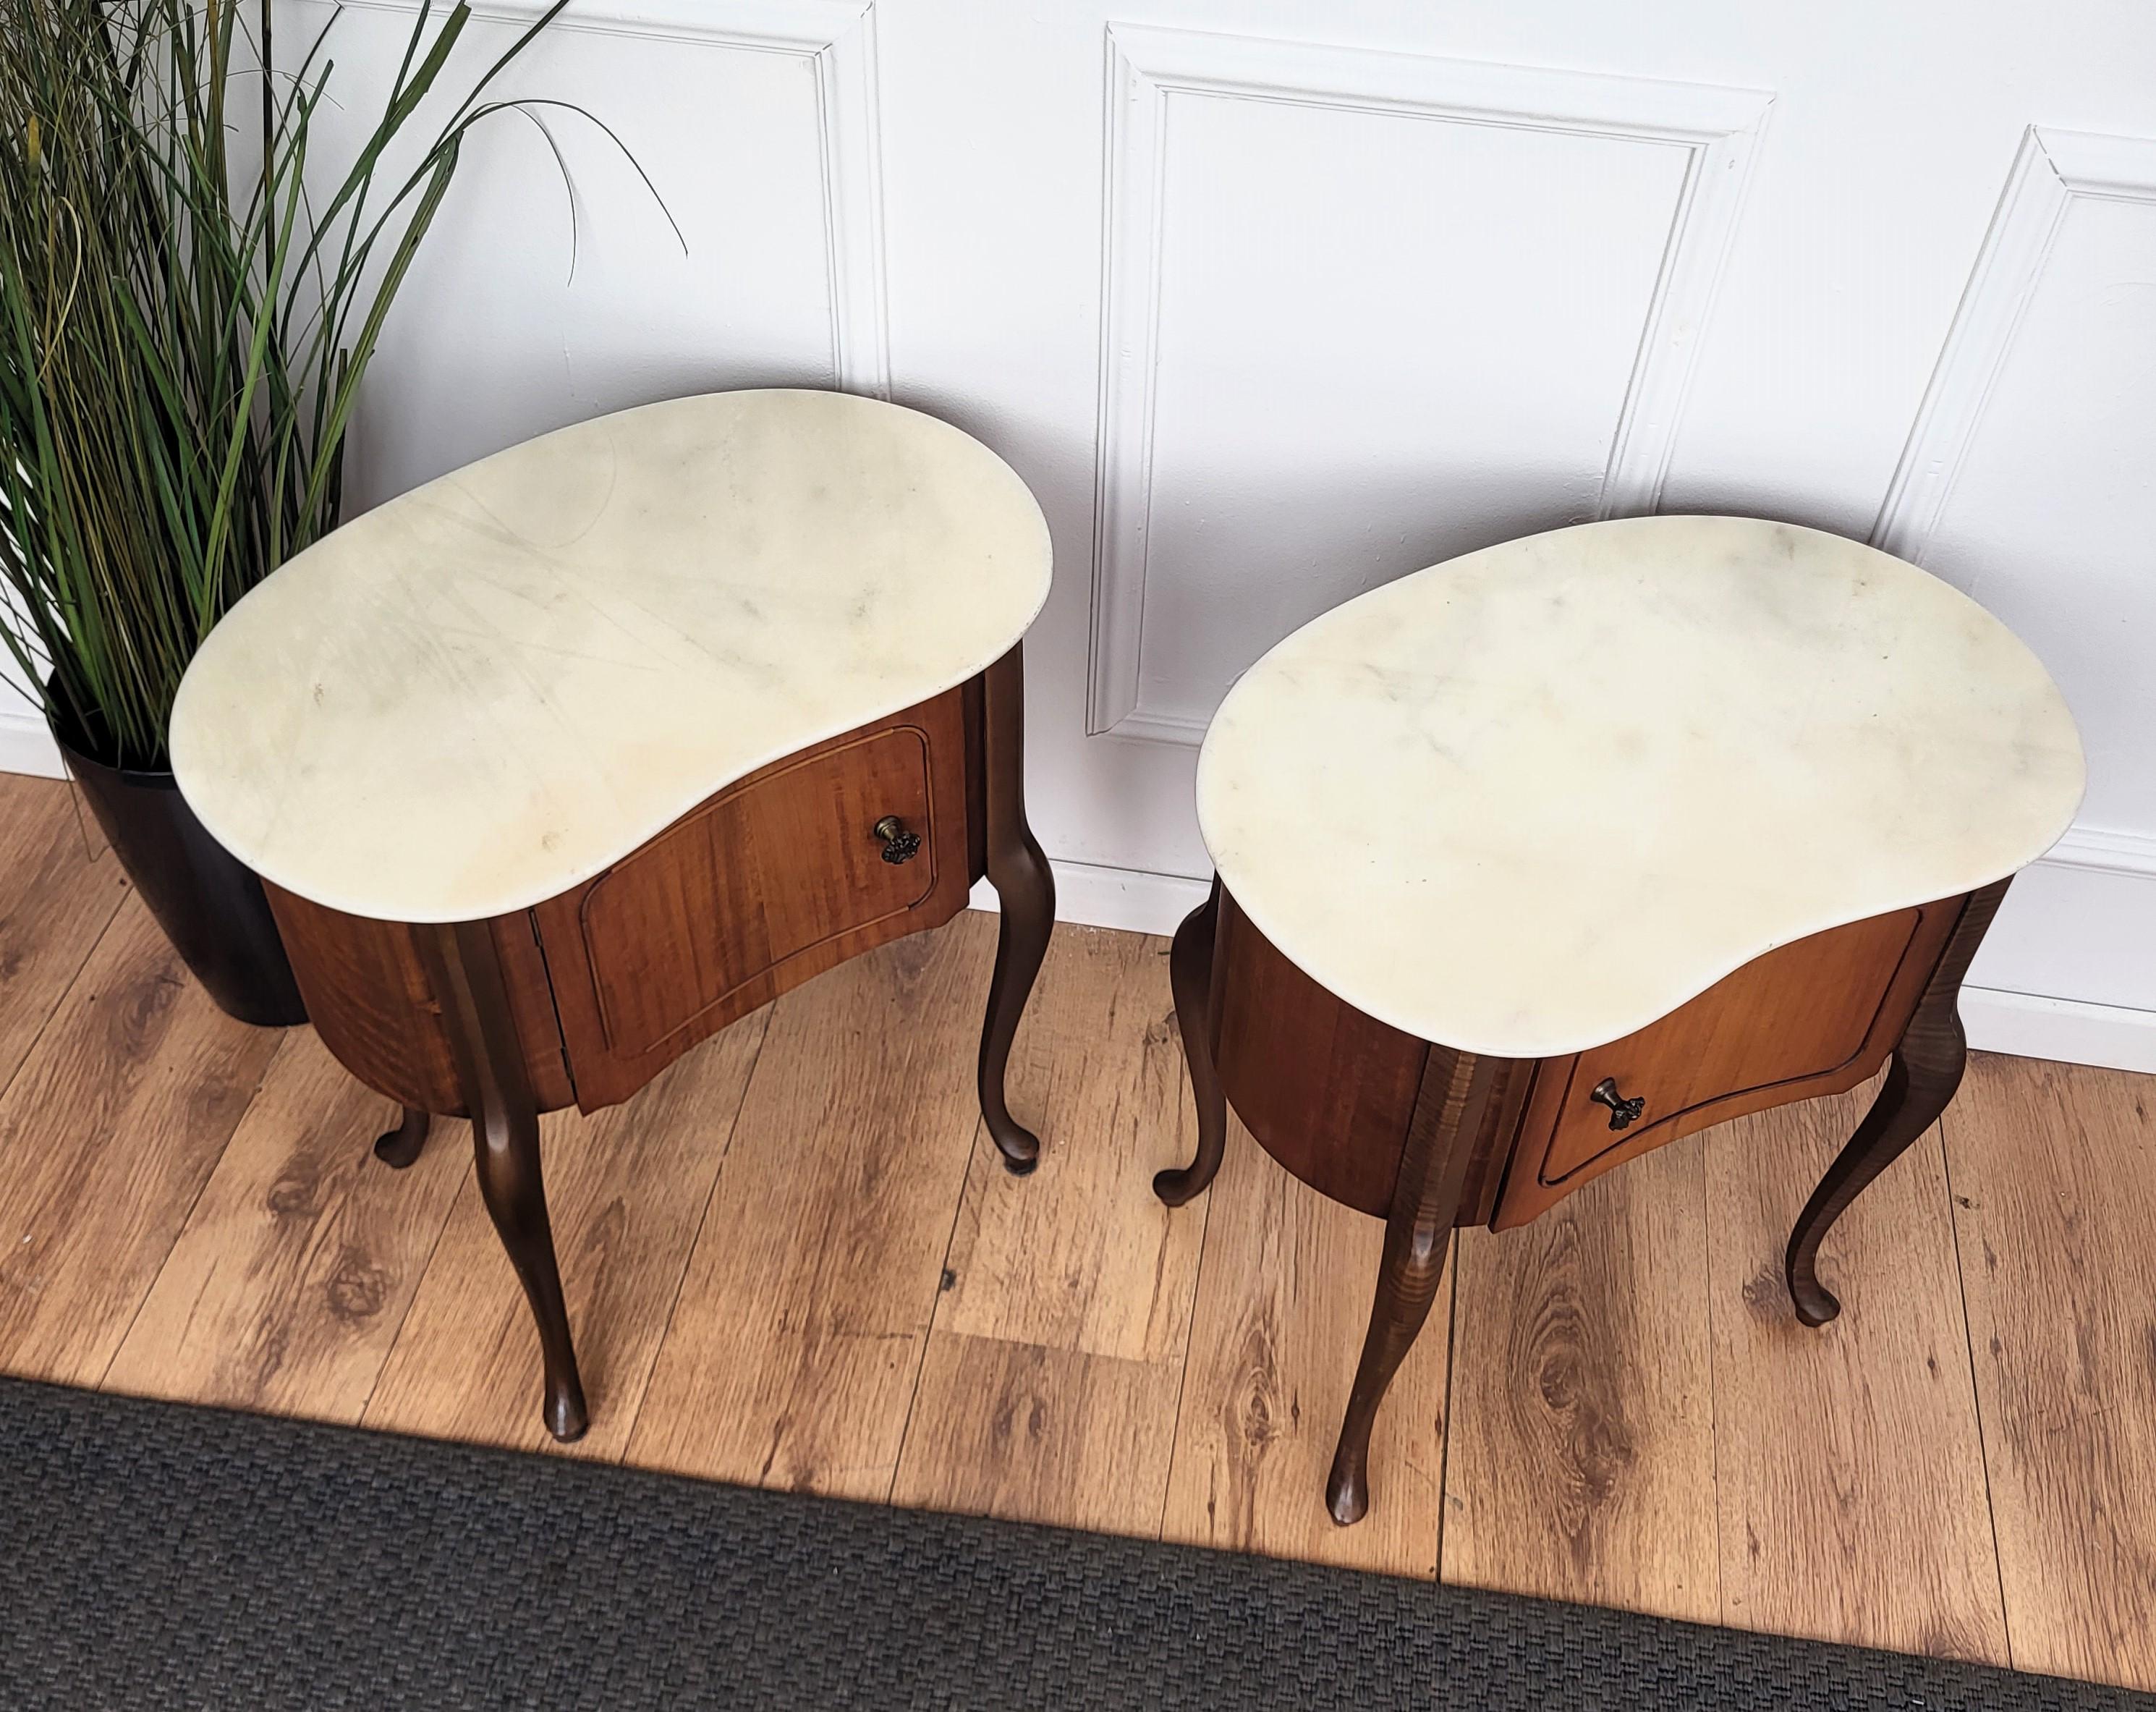 Pair of Italian Art Deco Kidney Shaped Night Stands Bedside Tables Marble Top For Sale 4